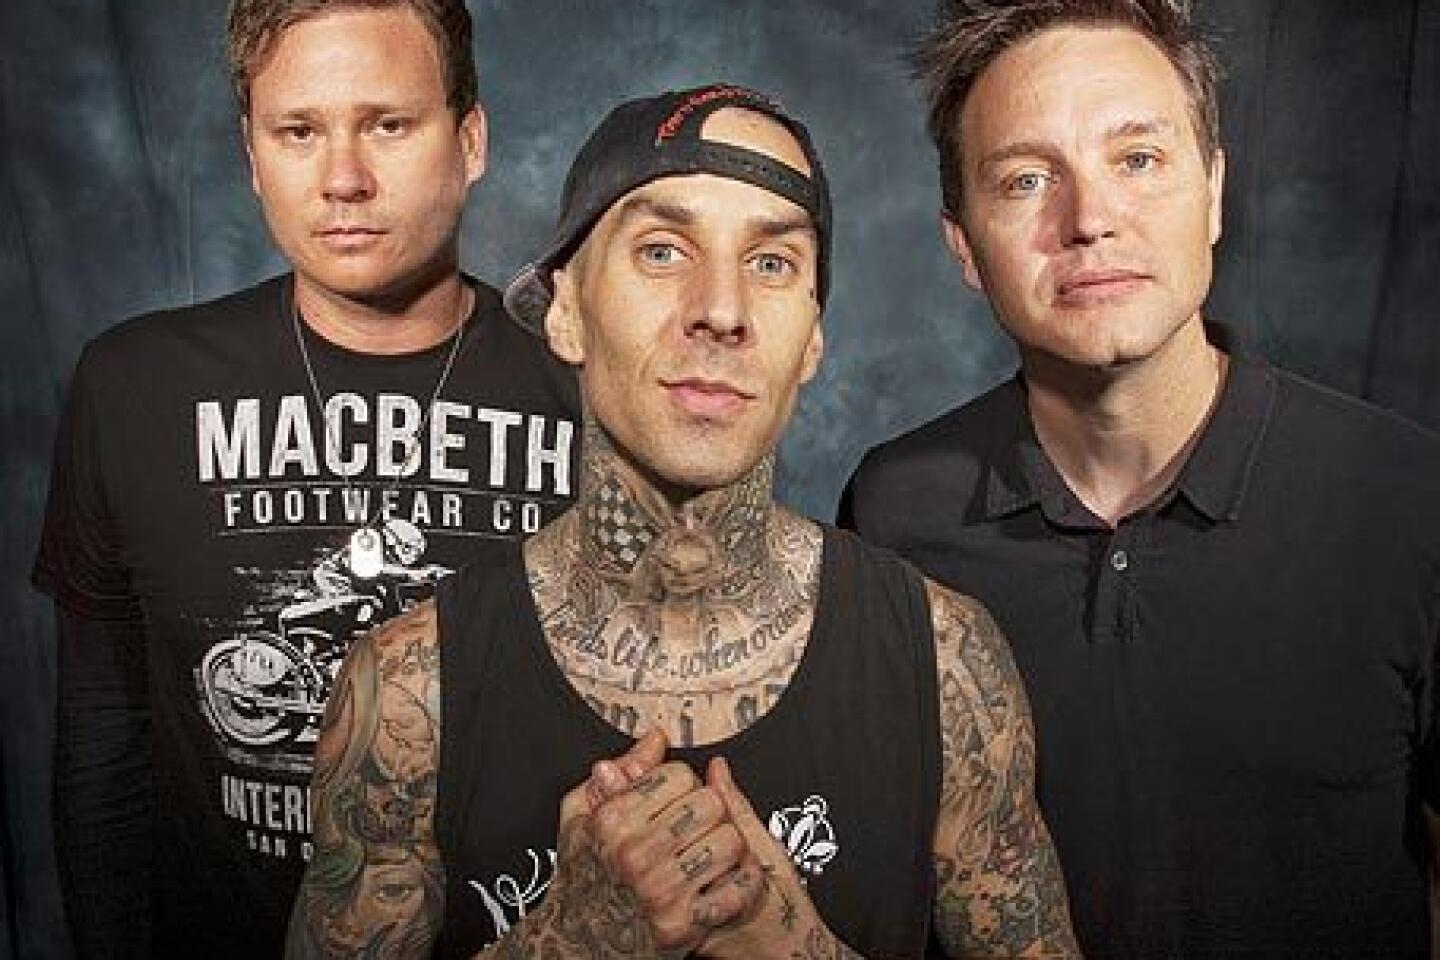 No joke, Blink-182 finds a happy mix between passion and parties